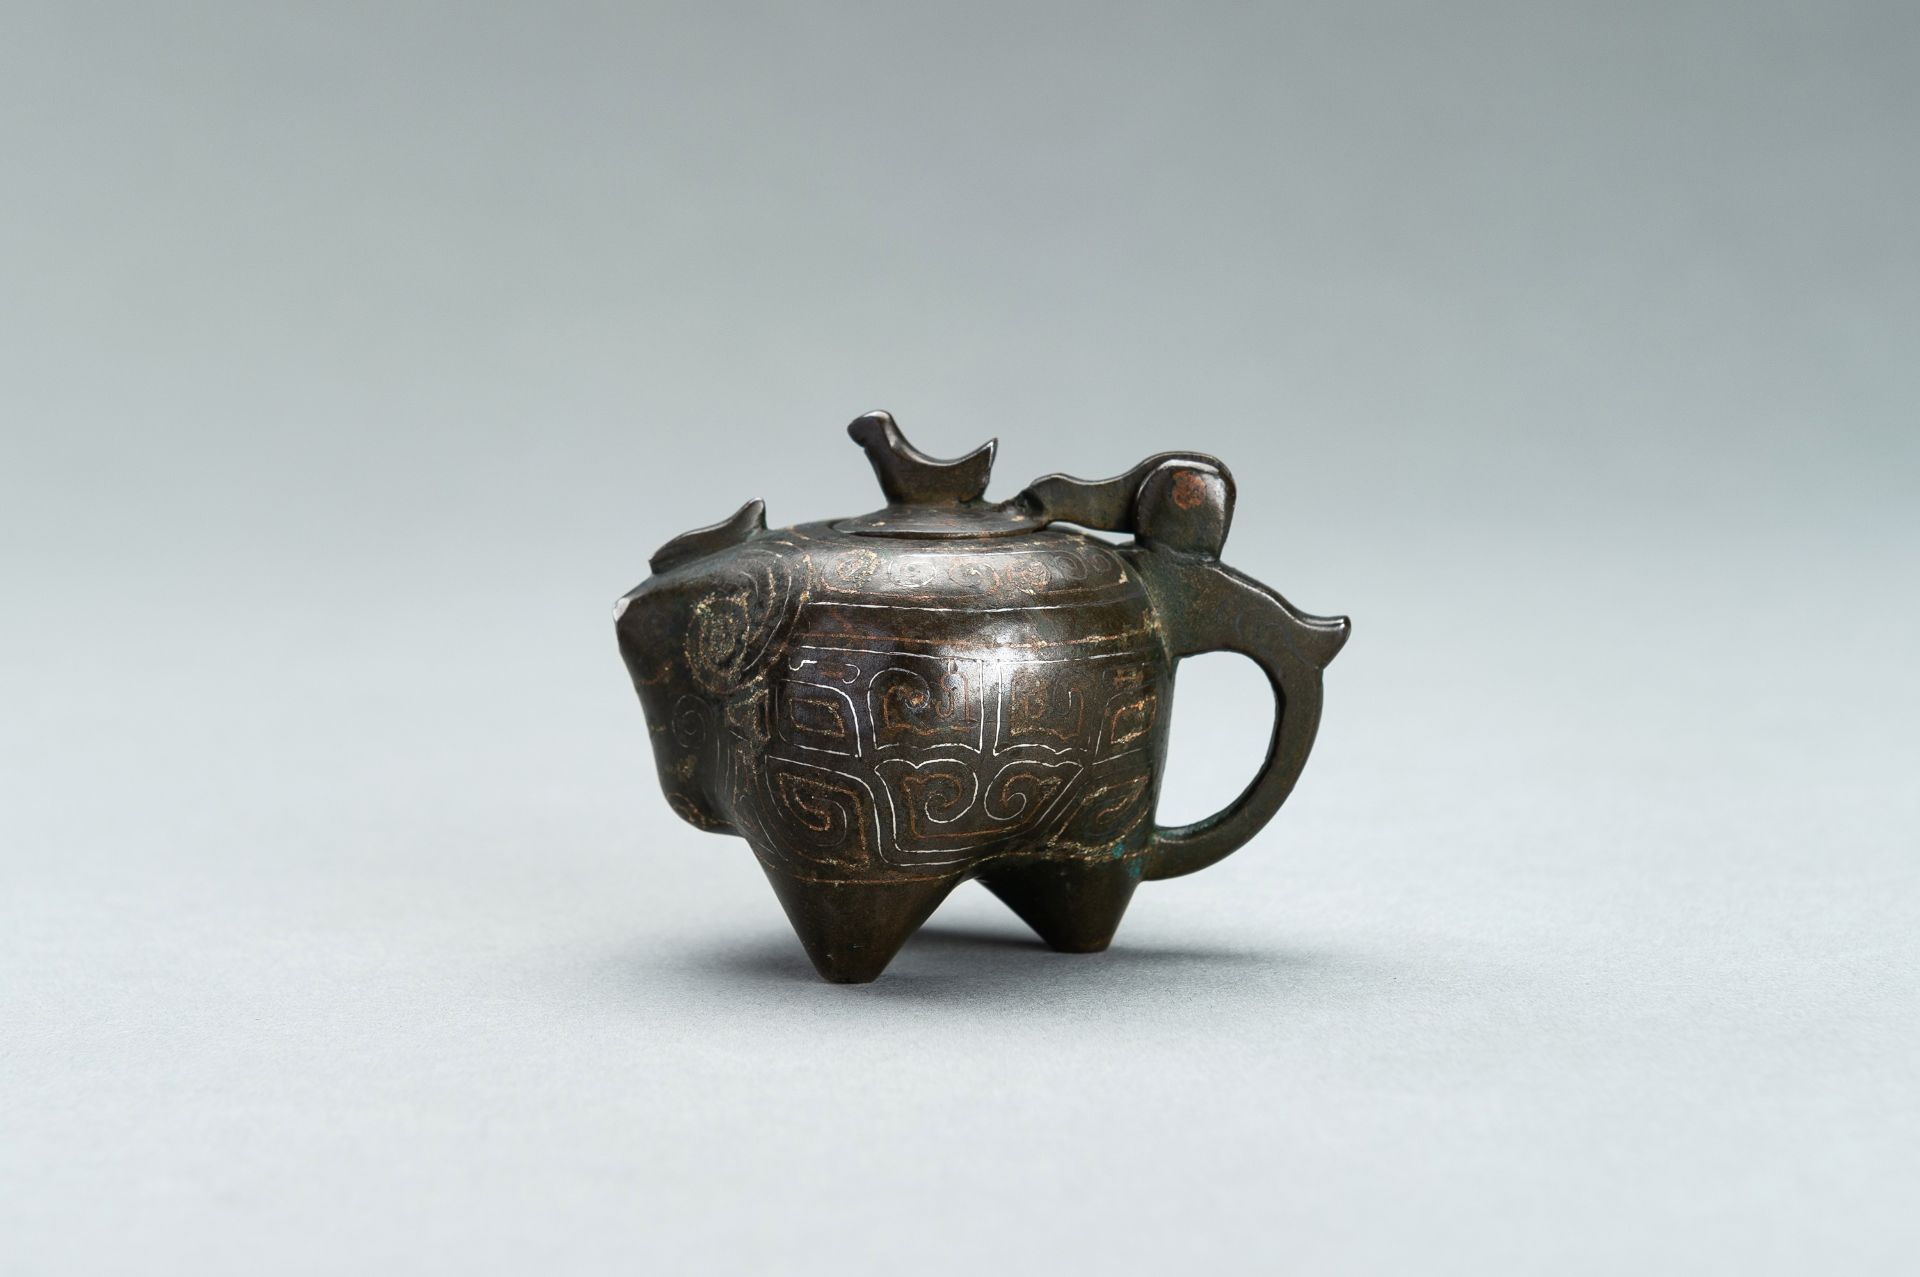 A SMALL COPPER AND SILVER INLAID BRONZE POURING TRIPOD VESSEL IN THE FORM OF AN ANIMAL, 17TH CENTURY - Image 2 of 11